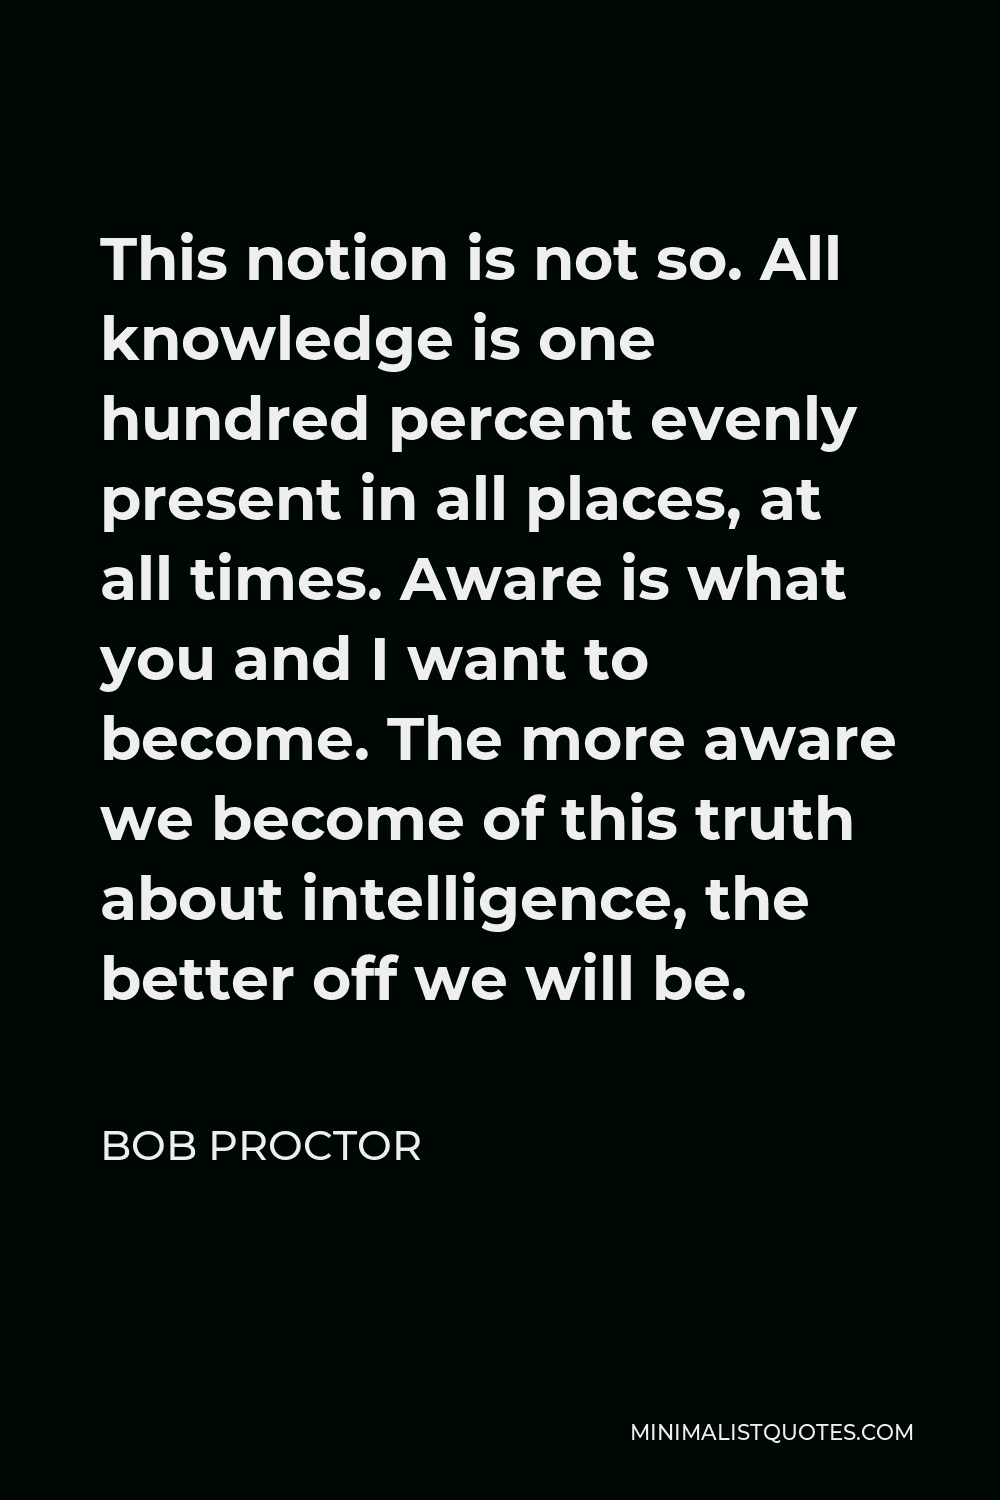 Bob Proctor Quote - This notion is not so. All knowledge is one hundred percent evenly present in all places, at all times. Aware is what you and I want to become. The more aware we become of this truth about intelligence, the better off we will be.